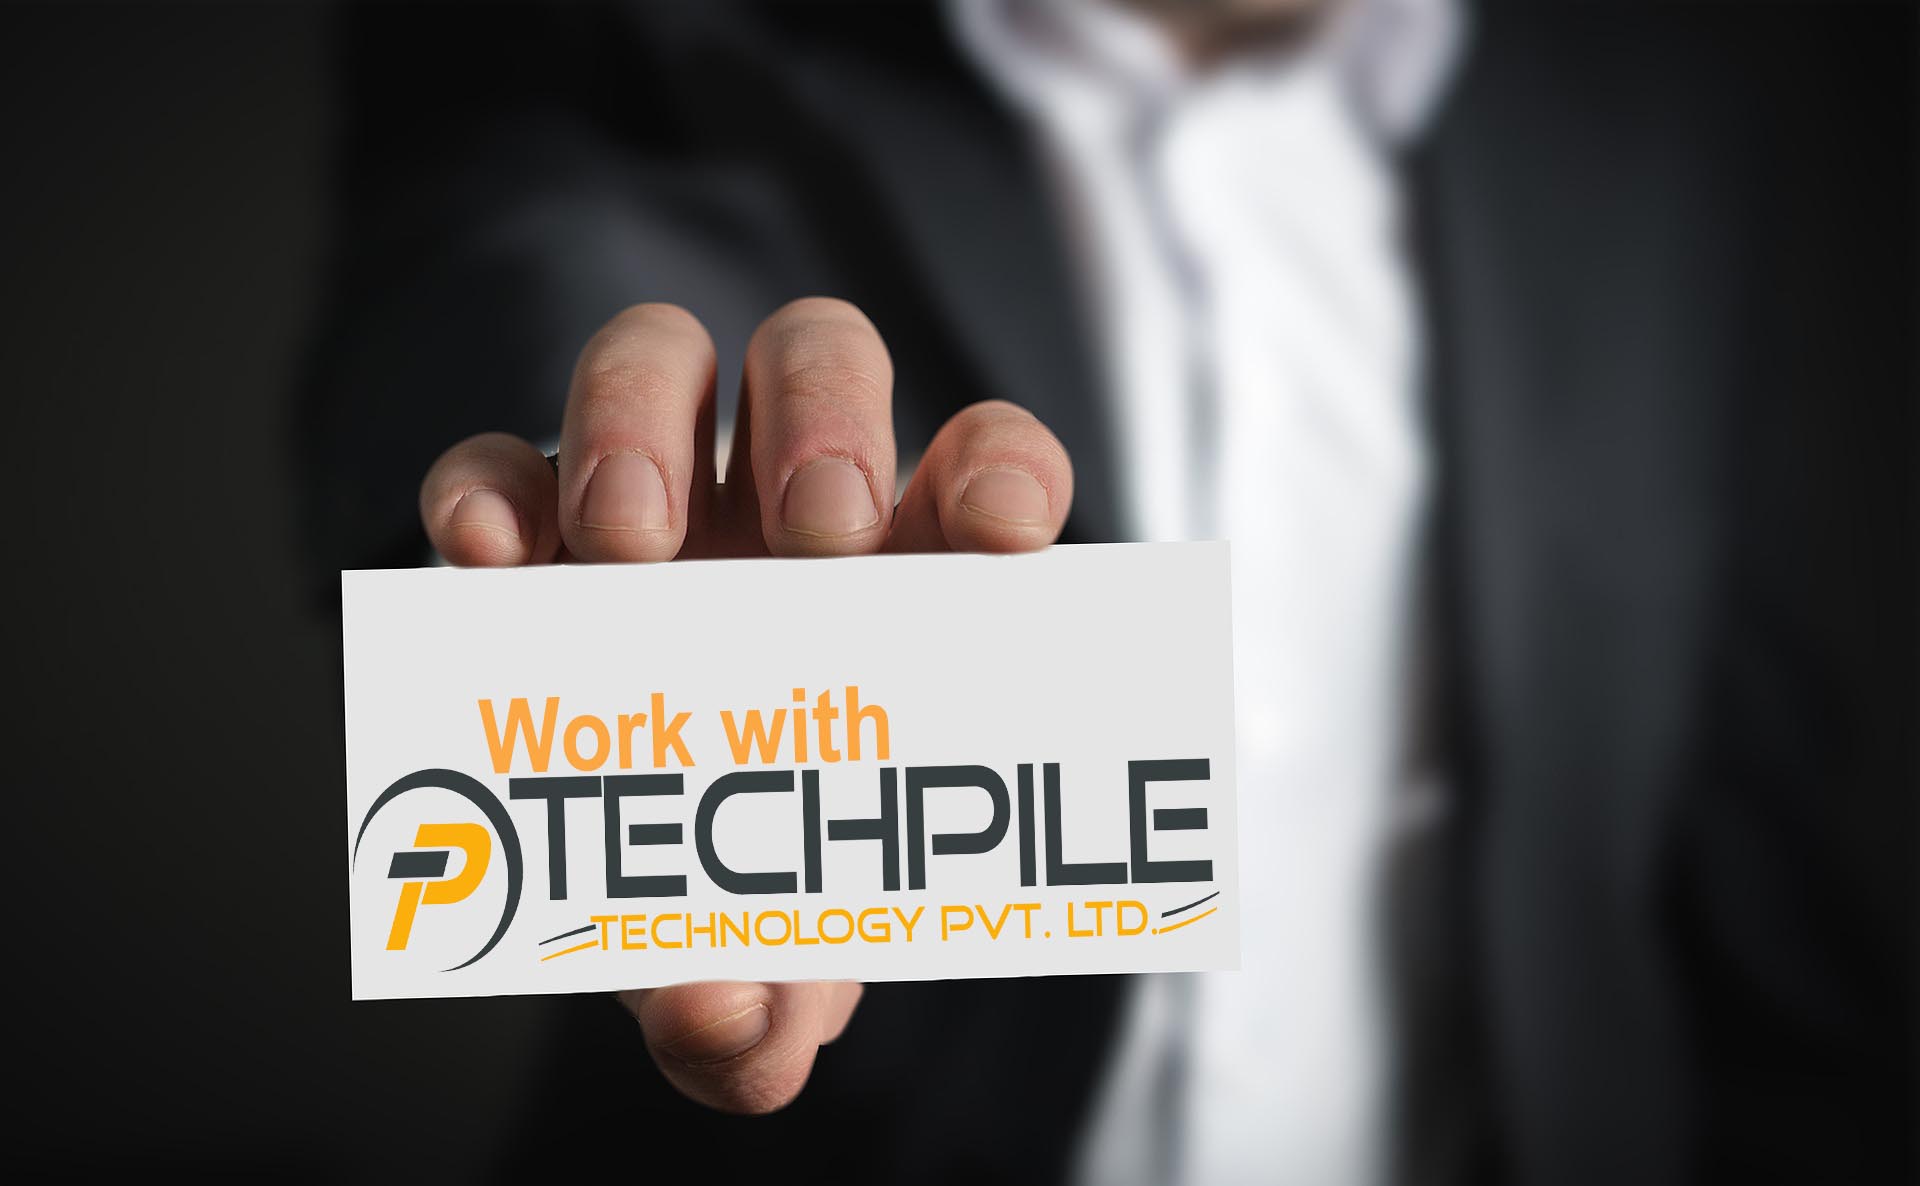 About Techpile